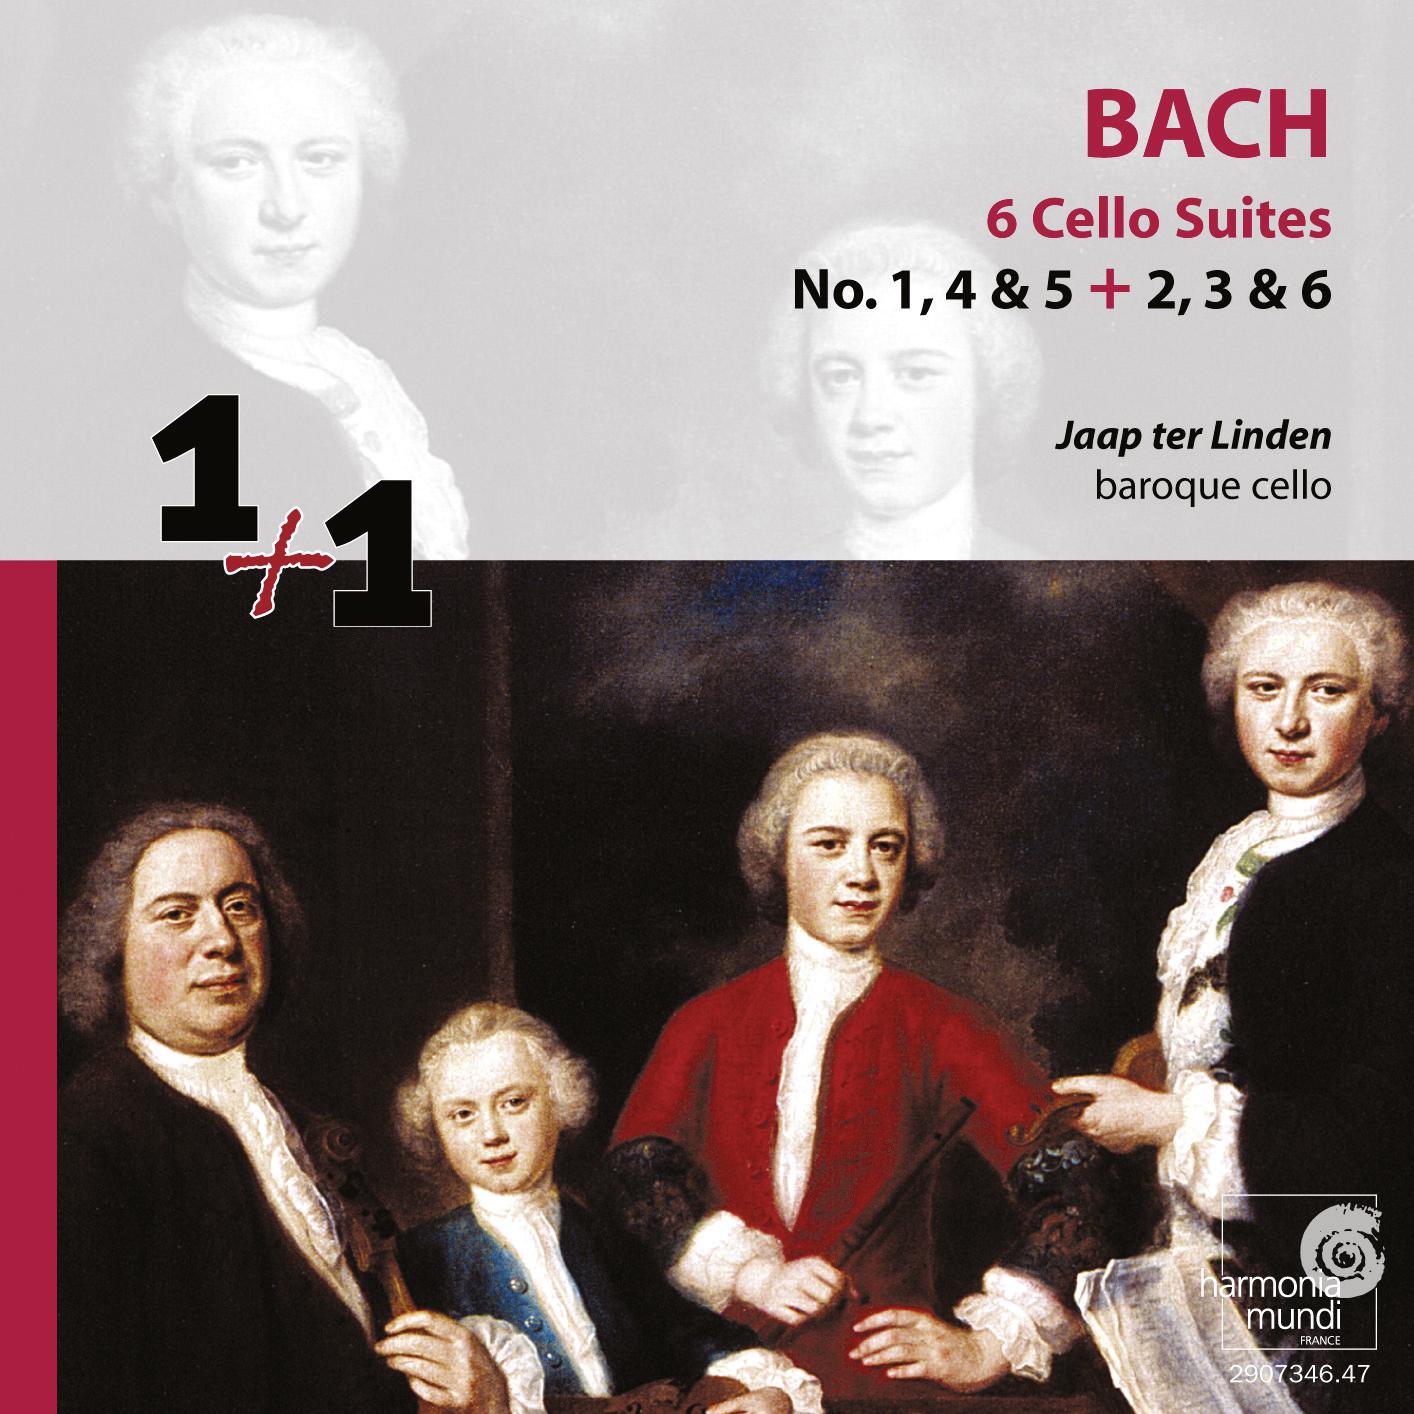 Suite No. 6 in D Major, BWV 1012: I. Prelude